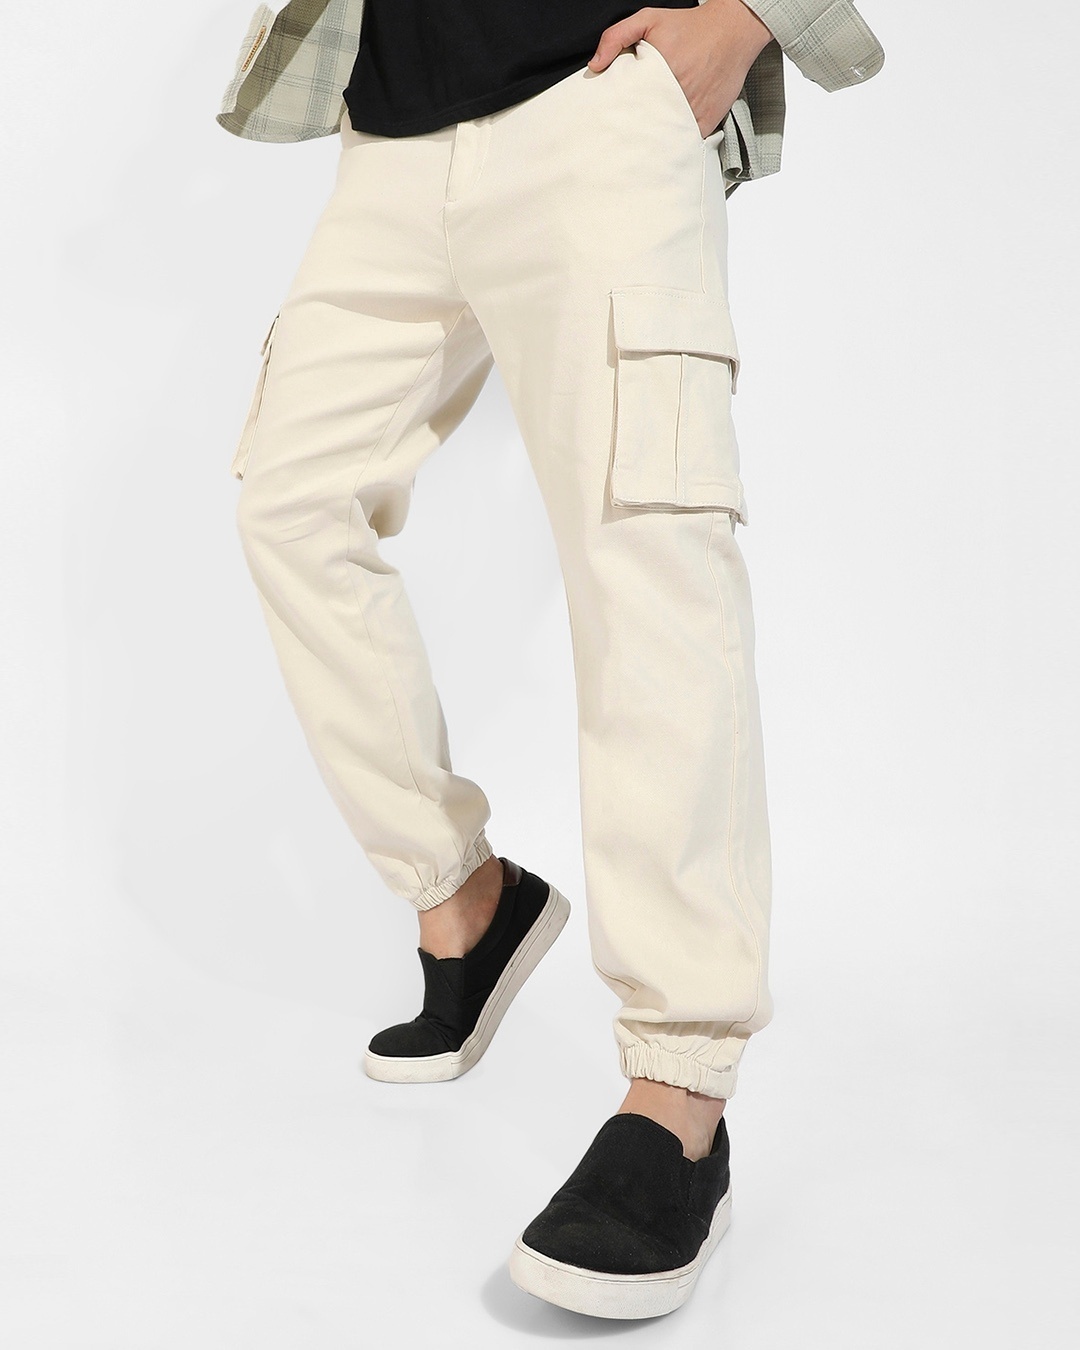 Light Grey Solid Cotton Nylon Spandex Men Regular Fit Cargo Trousers -  Selling Fast at Pantaloons.com